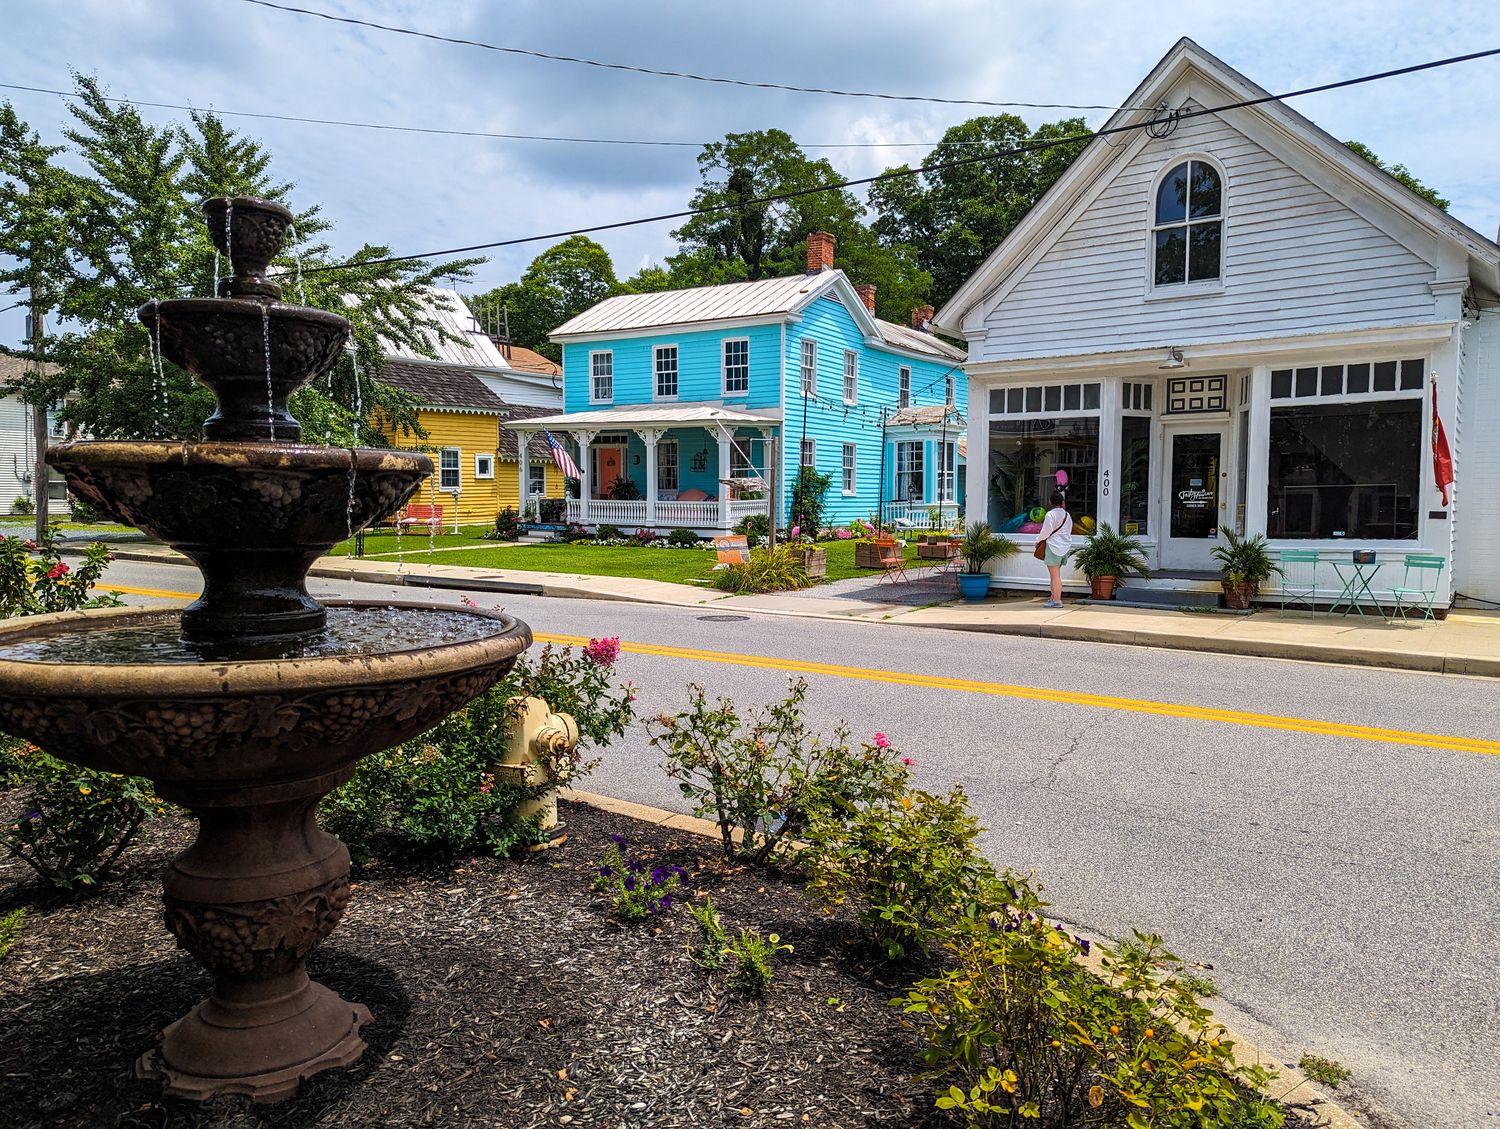 Strolling through Historic Stevensville, MD. Shops and a fountain line the street.